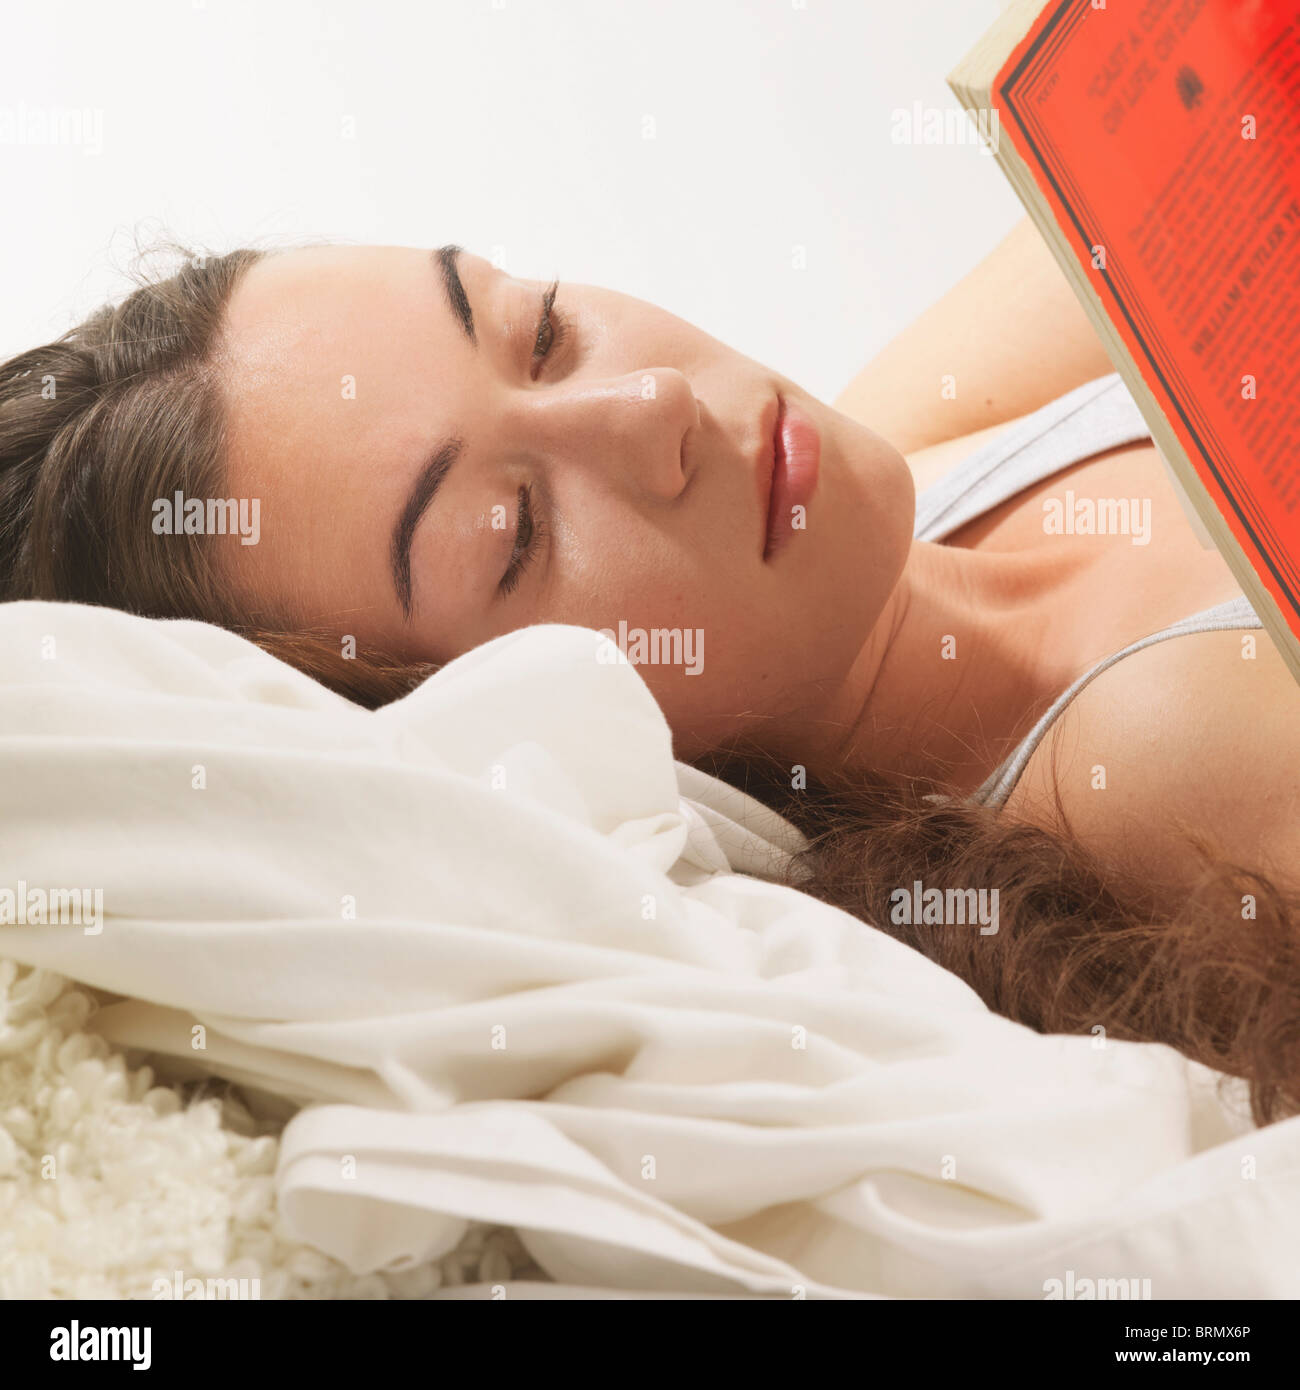 Woman reclined reading book Stock Photo